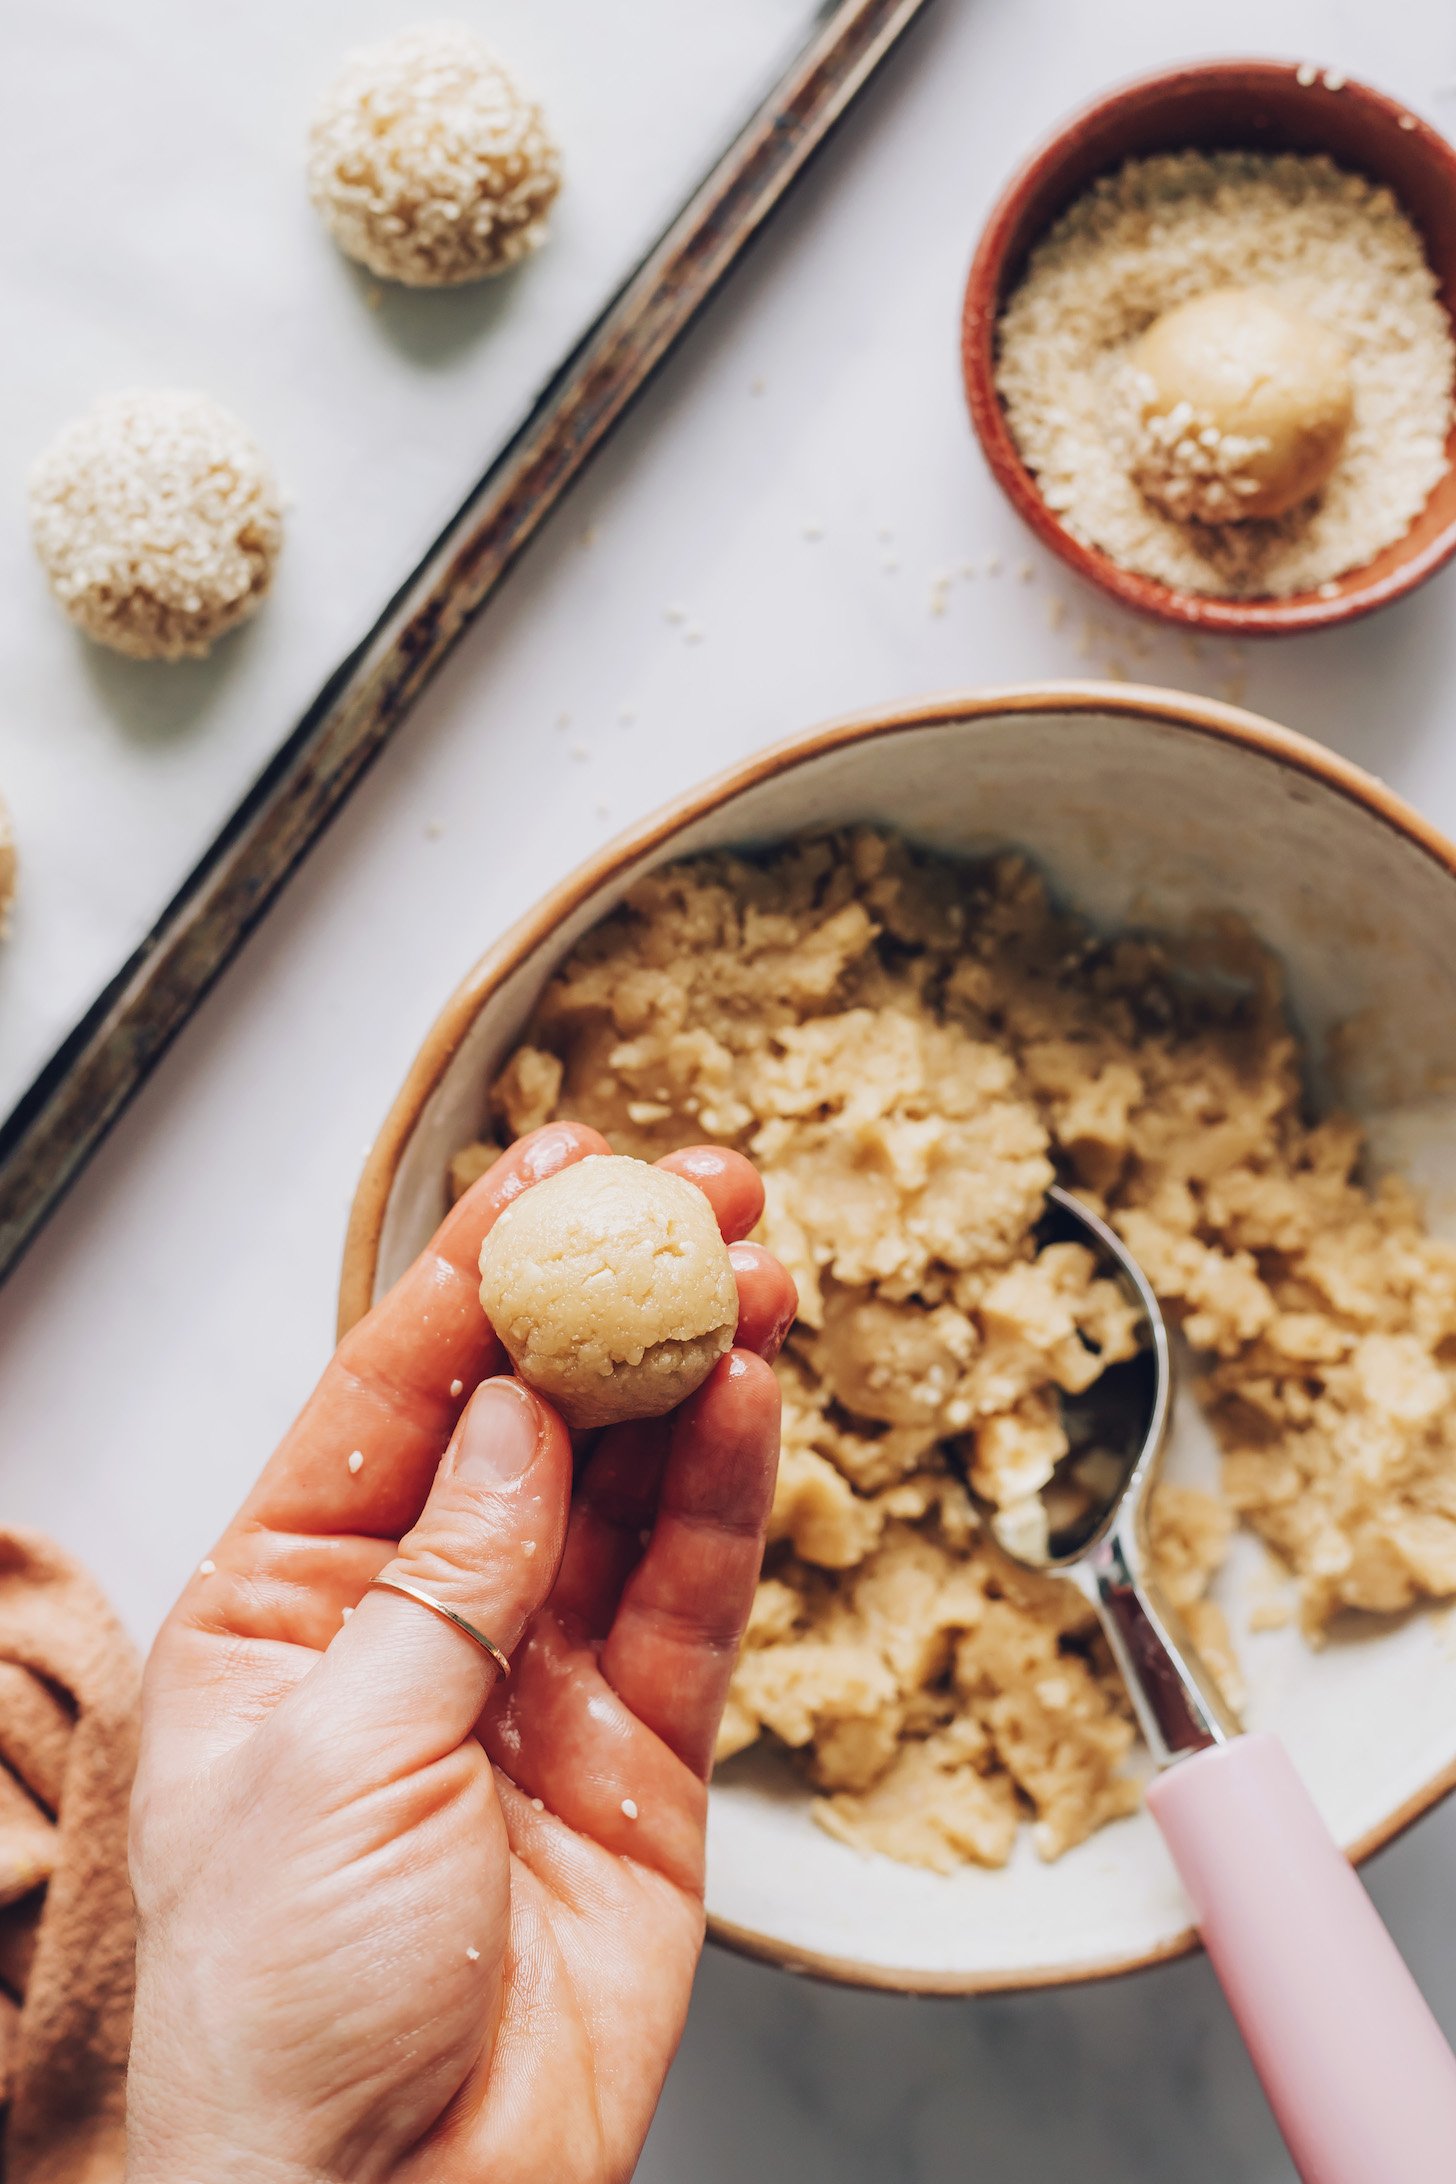 Holding a ball of cookie dough over a mixing bowl